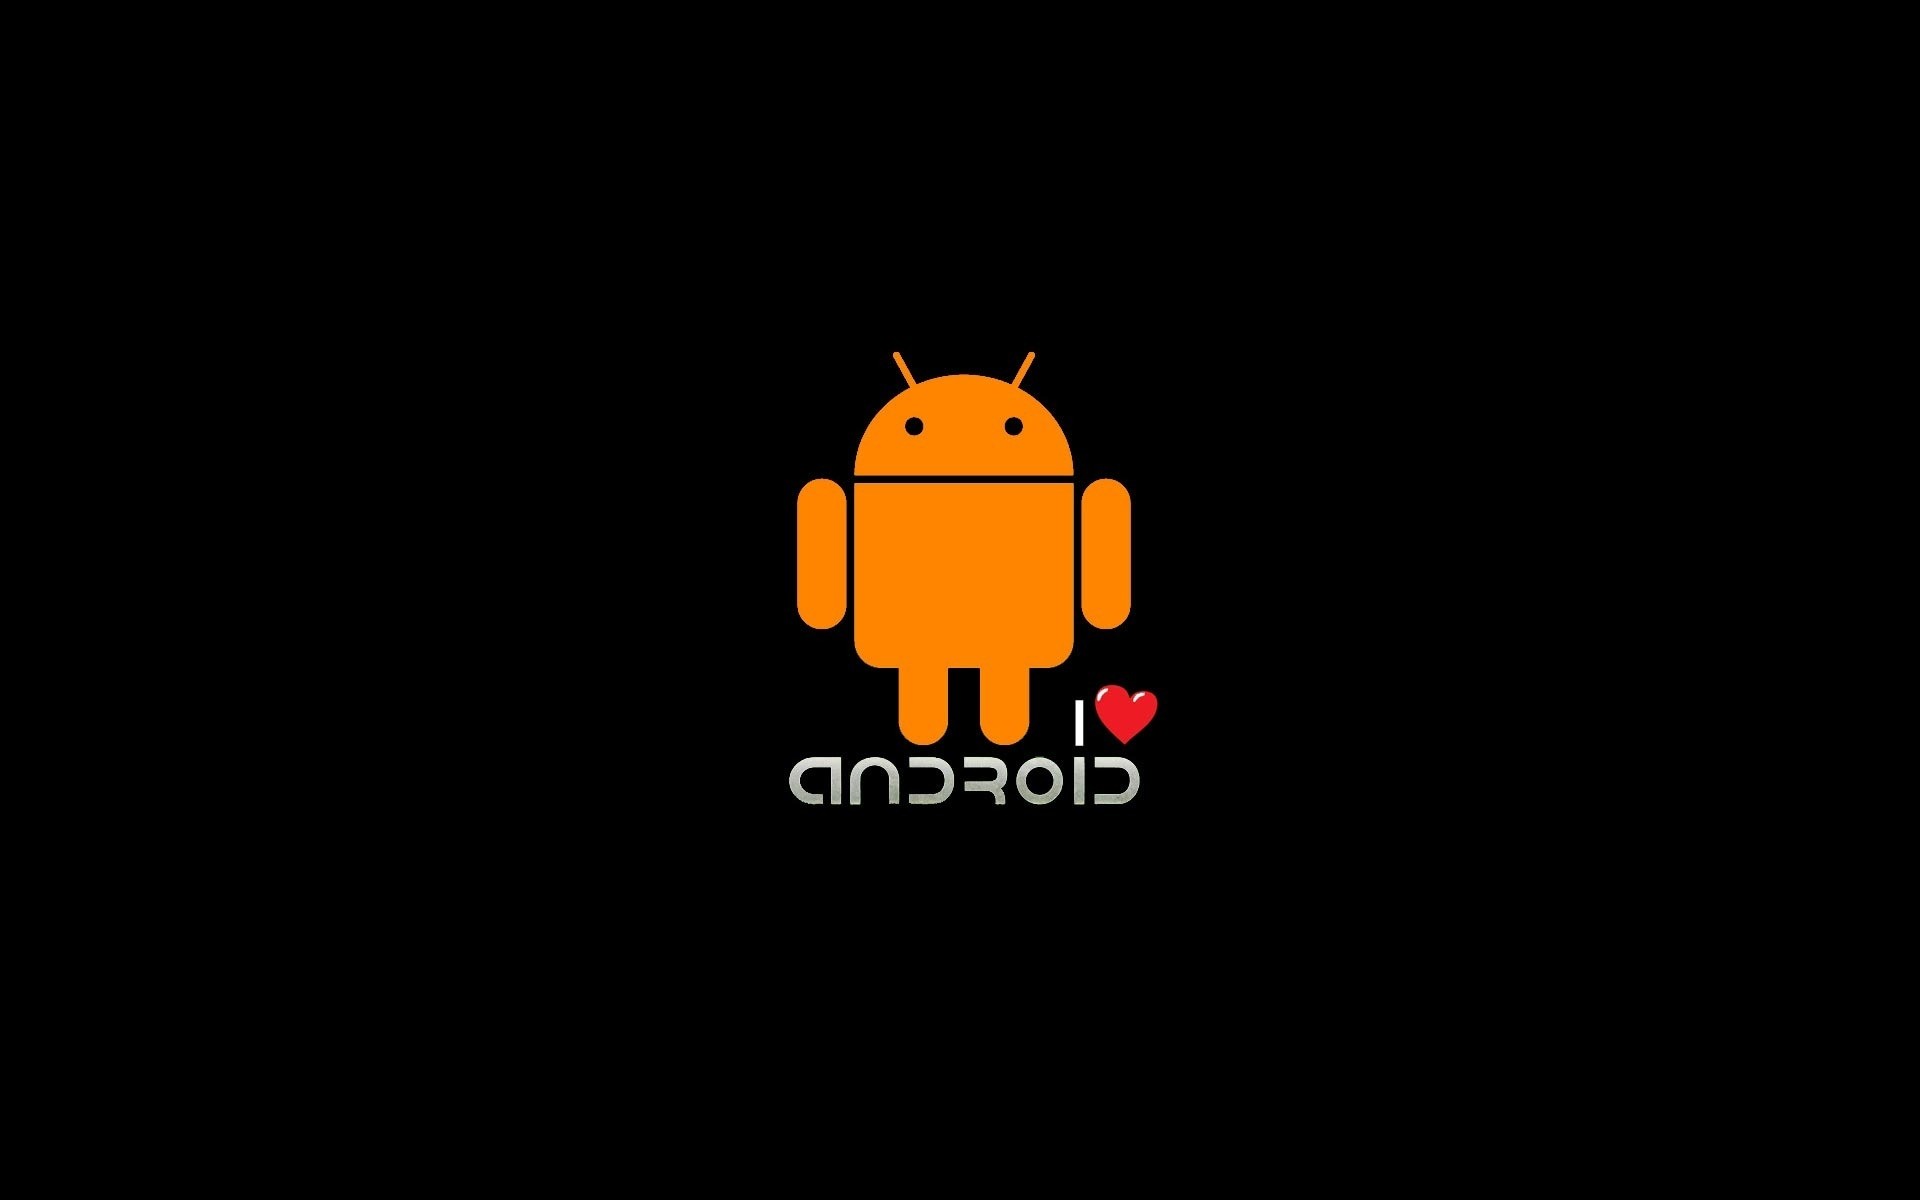 android illustration background android logo love heart tech gadget